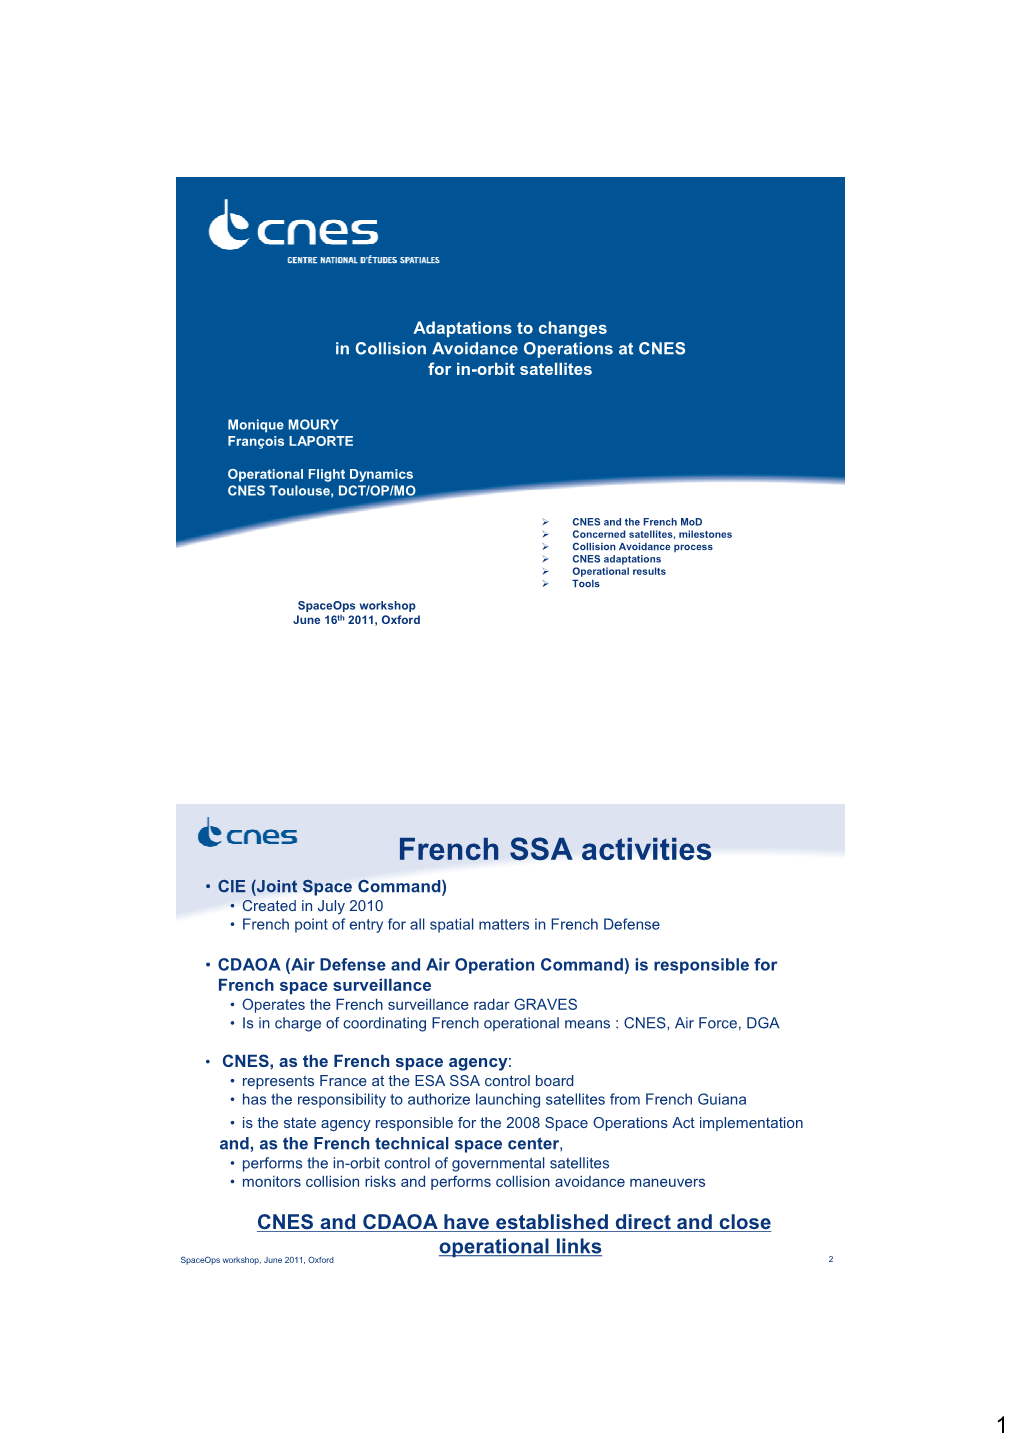 French SSA Activities • CIE (Joint Space Command) • Created in July 2010 • French Point of Entry for All Spatial Matters in French Defense